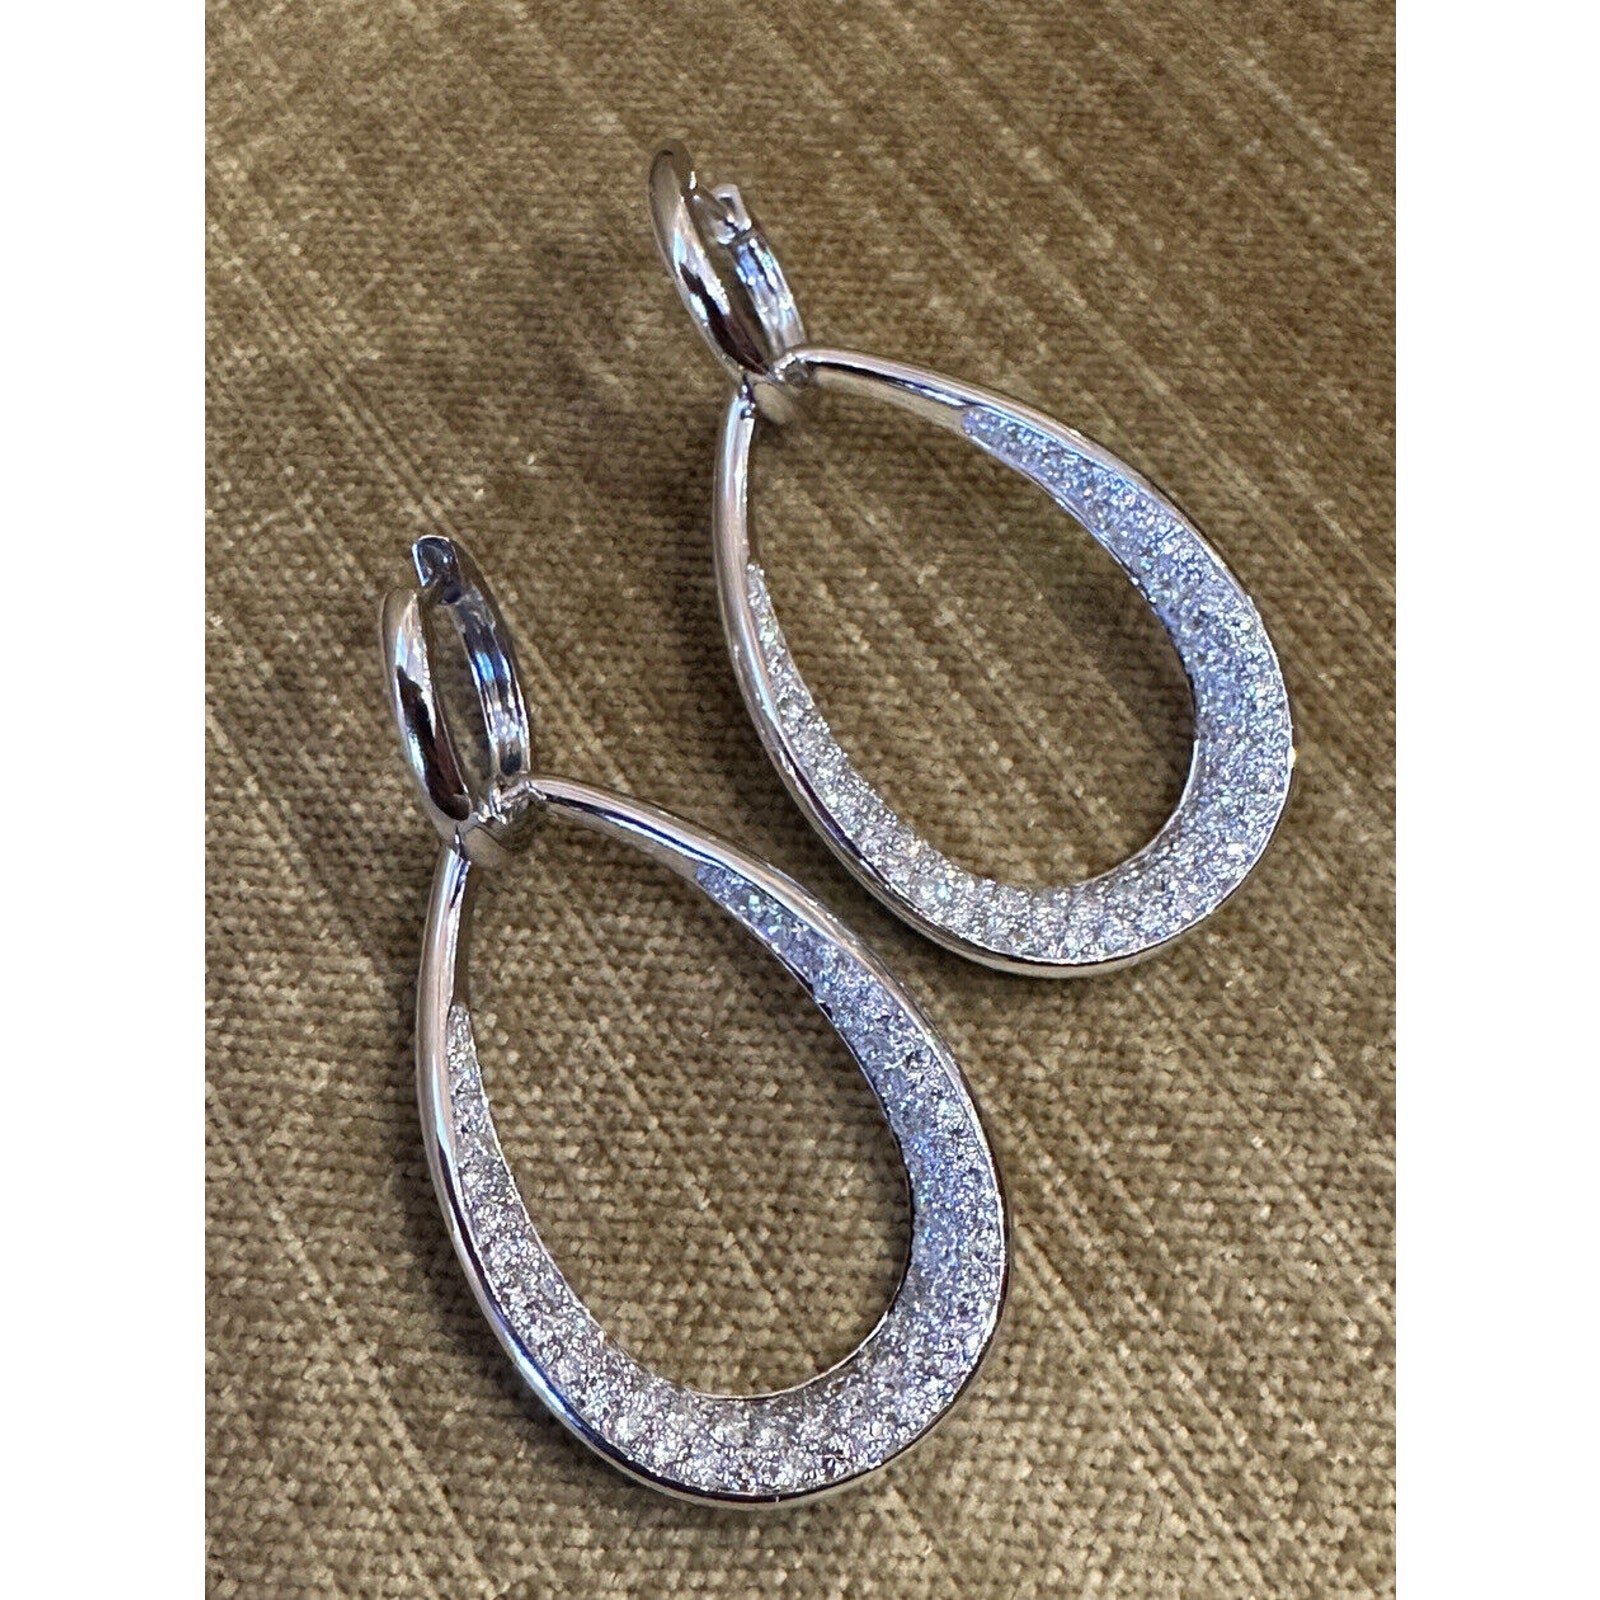 Large Open Hoop Pave Diamond Earrings 3.05 cttw in 18k White Gold--HM2414AS